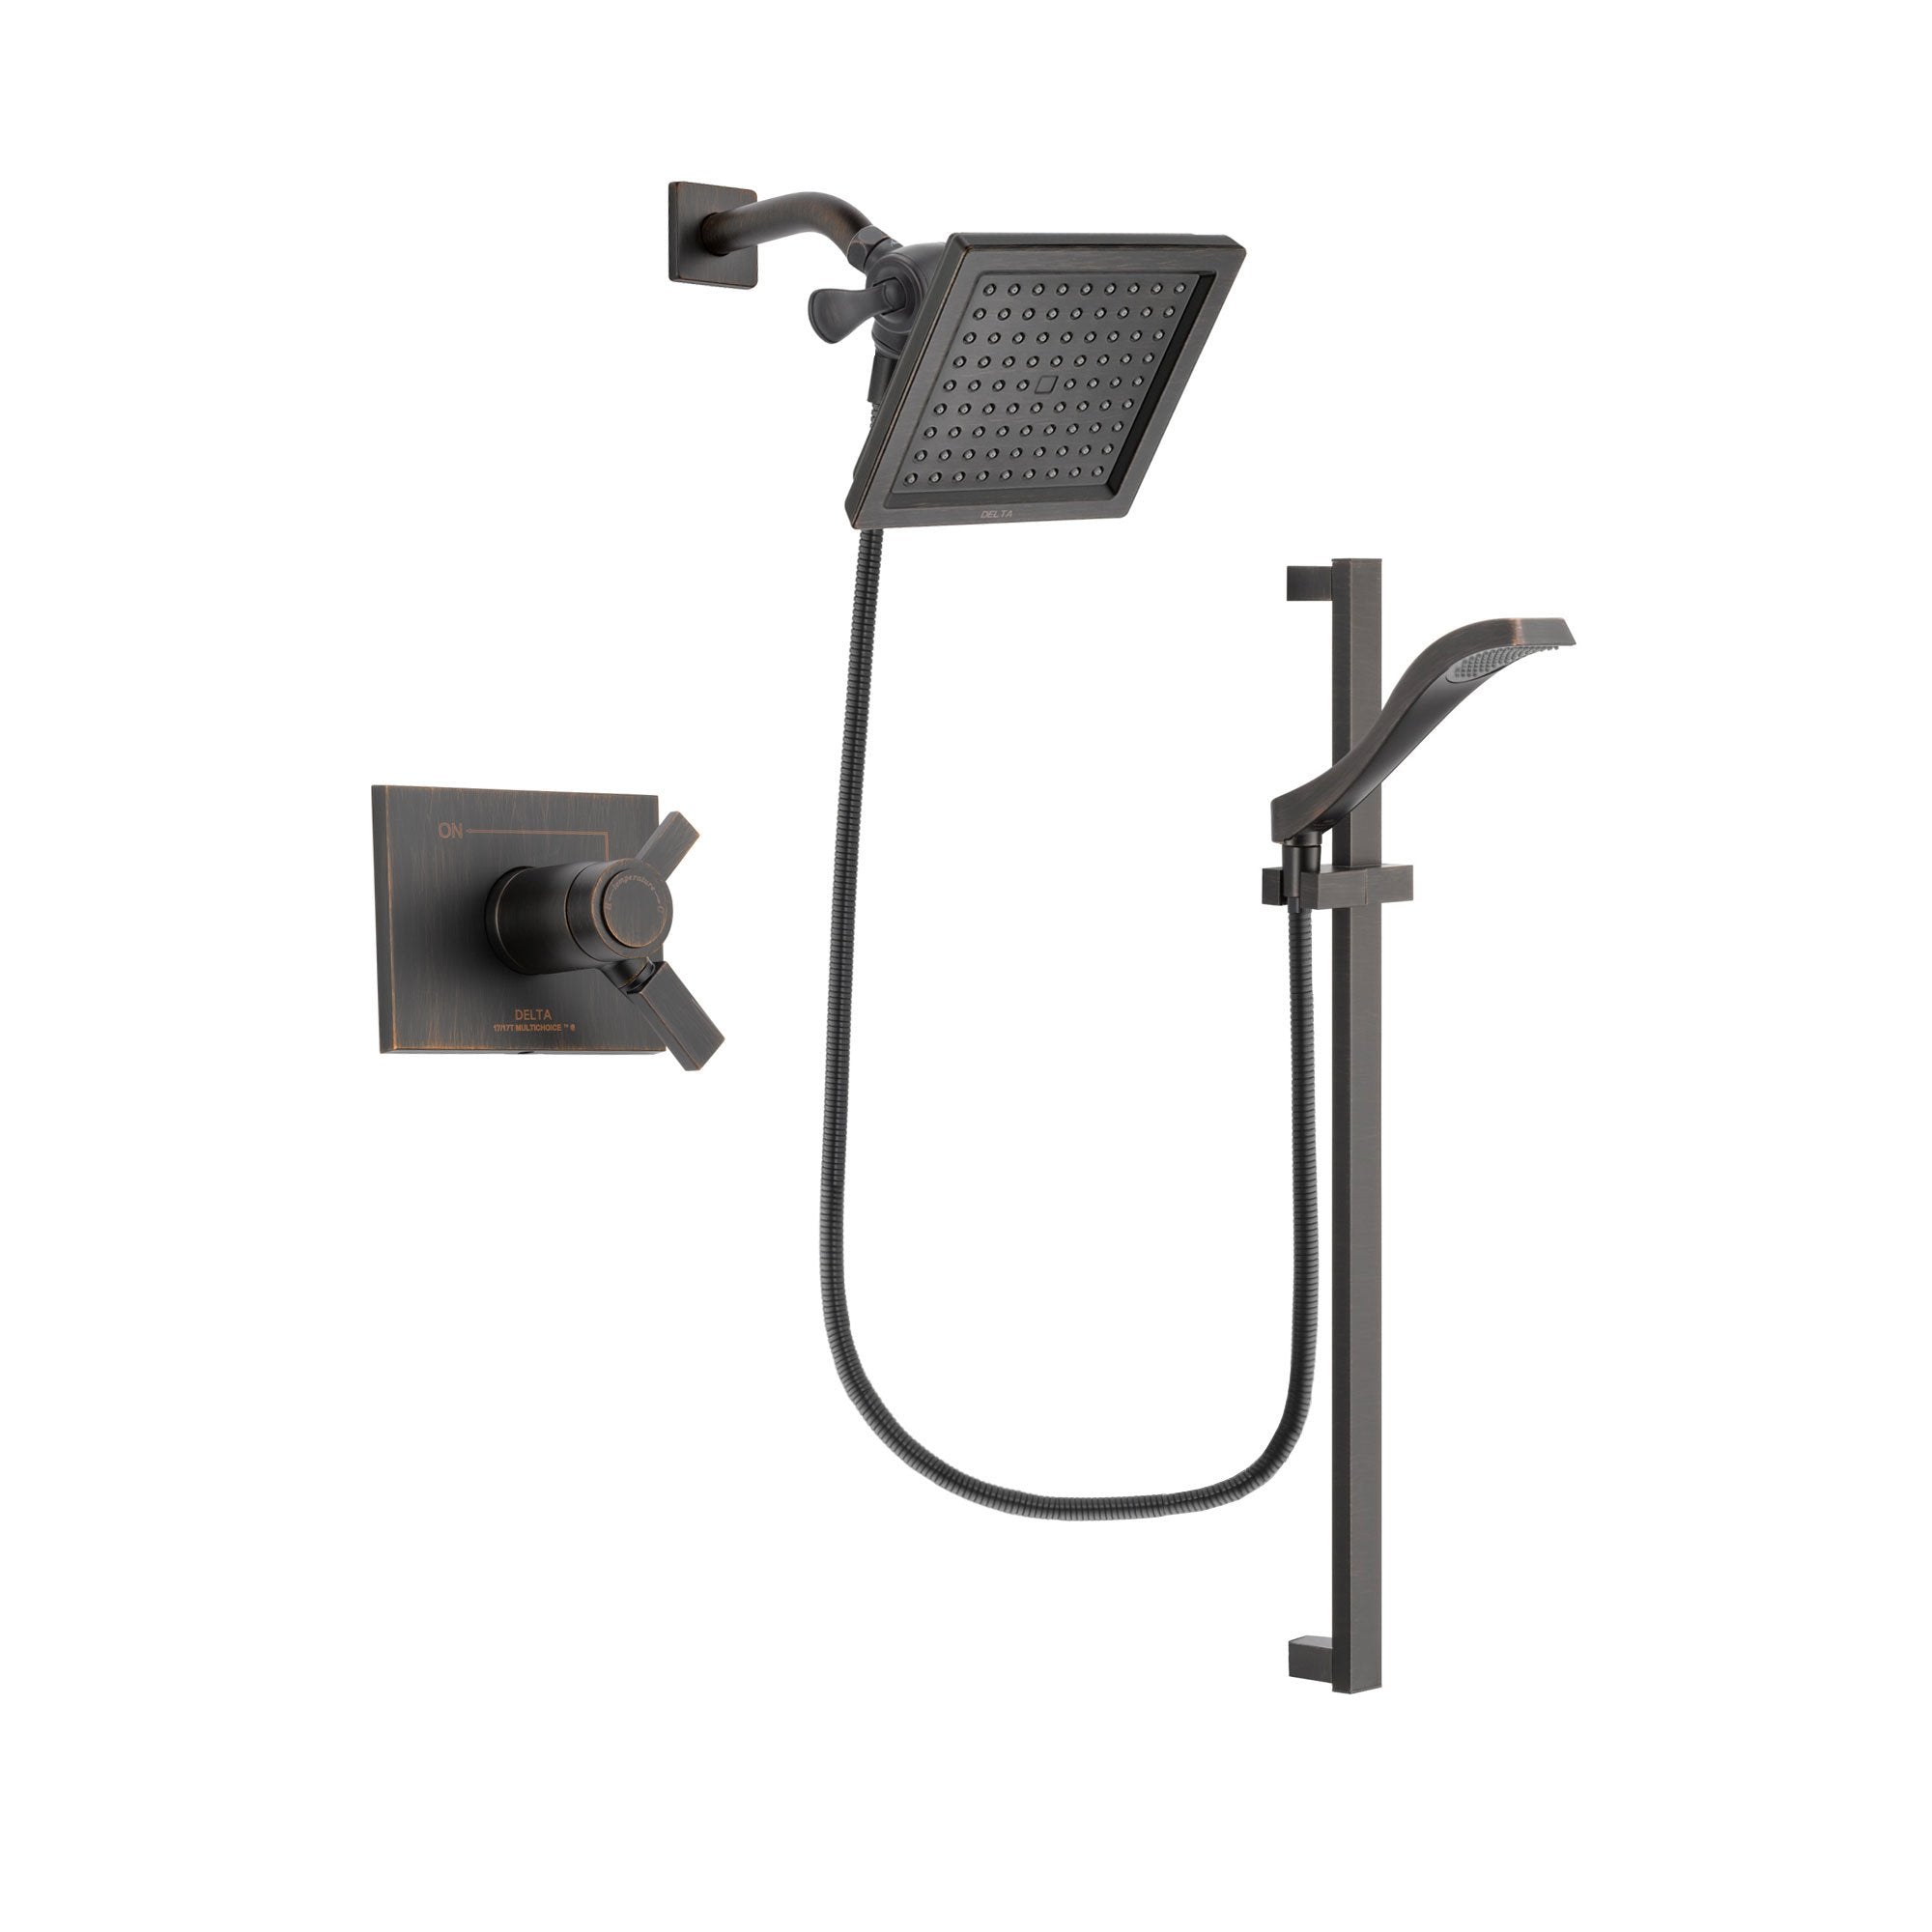 Delta Vero Venetian Bronze Finish Thermostatic Shower Faucet System Package with 6.5-inch Square Rain Showerhead and Modern Handheld Shower Spray with Slide Bar Includes Rough-in Valve DSP3116V